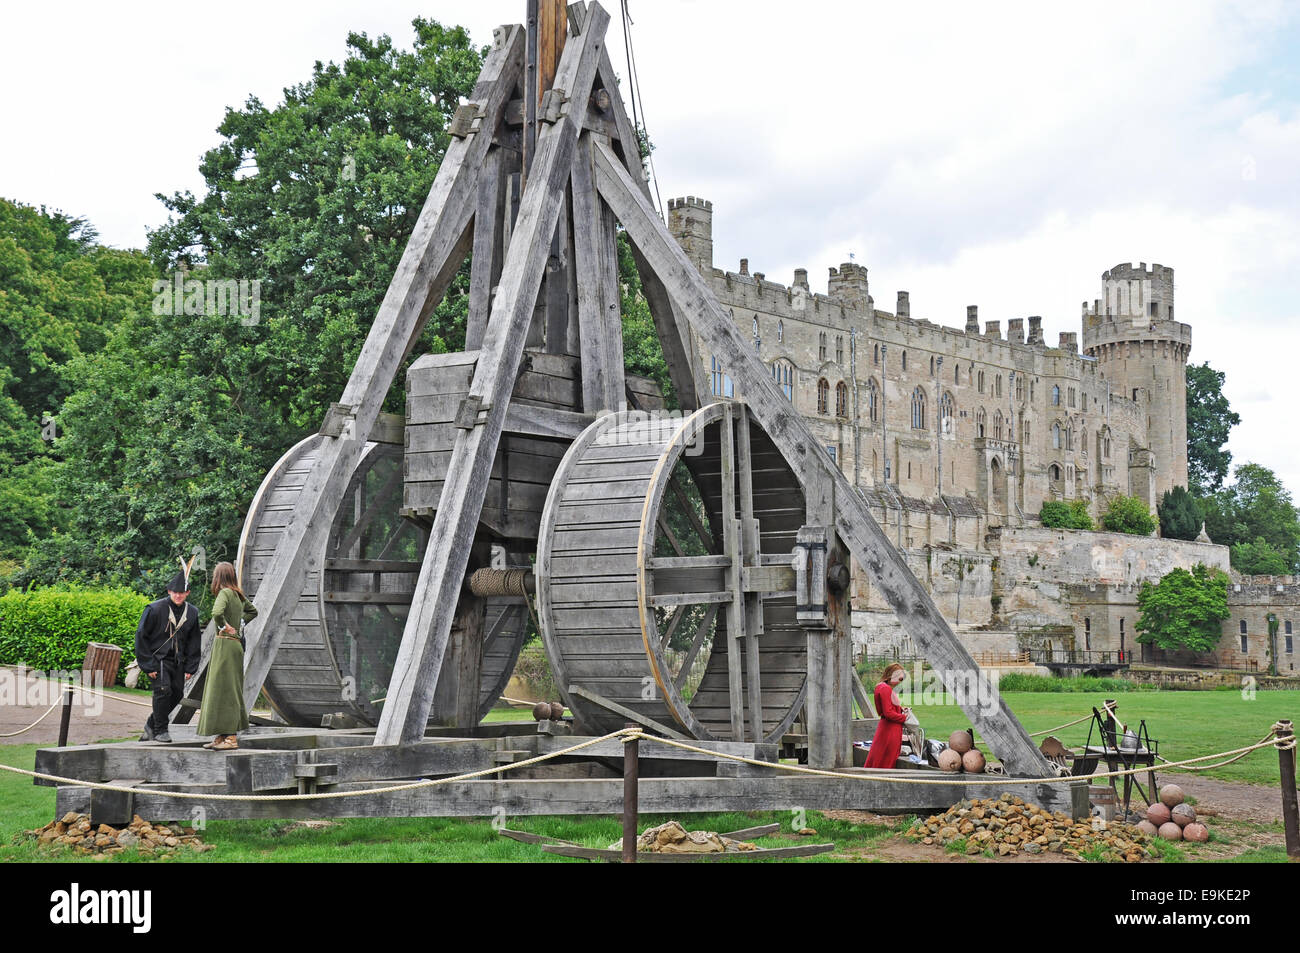 Warwick Castle, England, UK. Man, two women and authentic recreation of a trebuchet (large catapult). World's largest working siege machine. Stock Photo